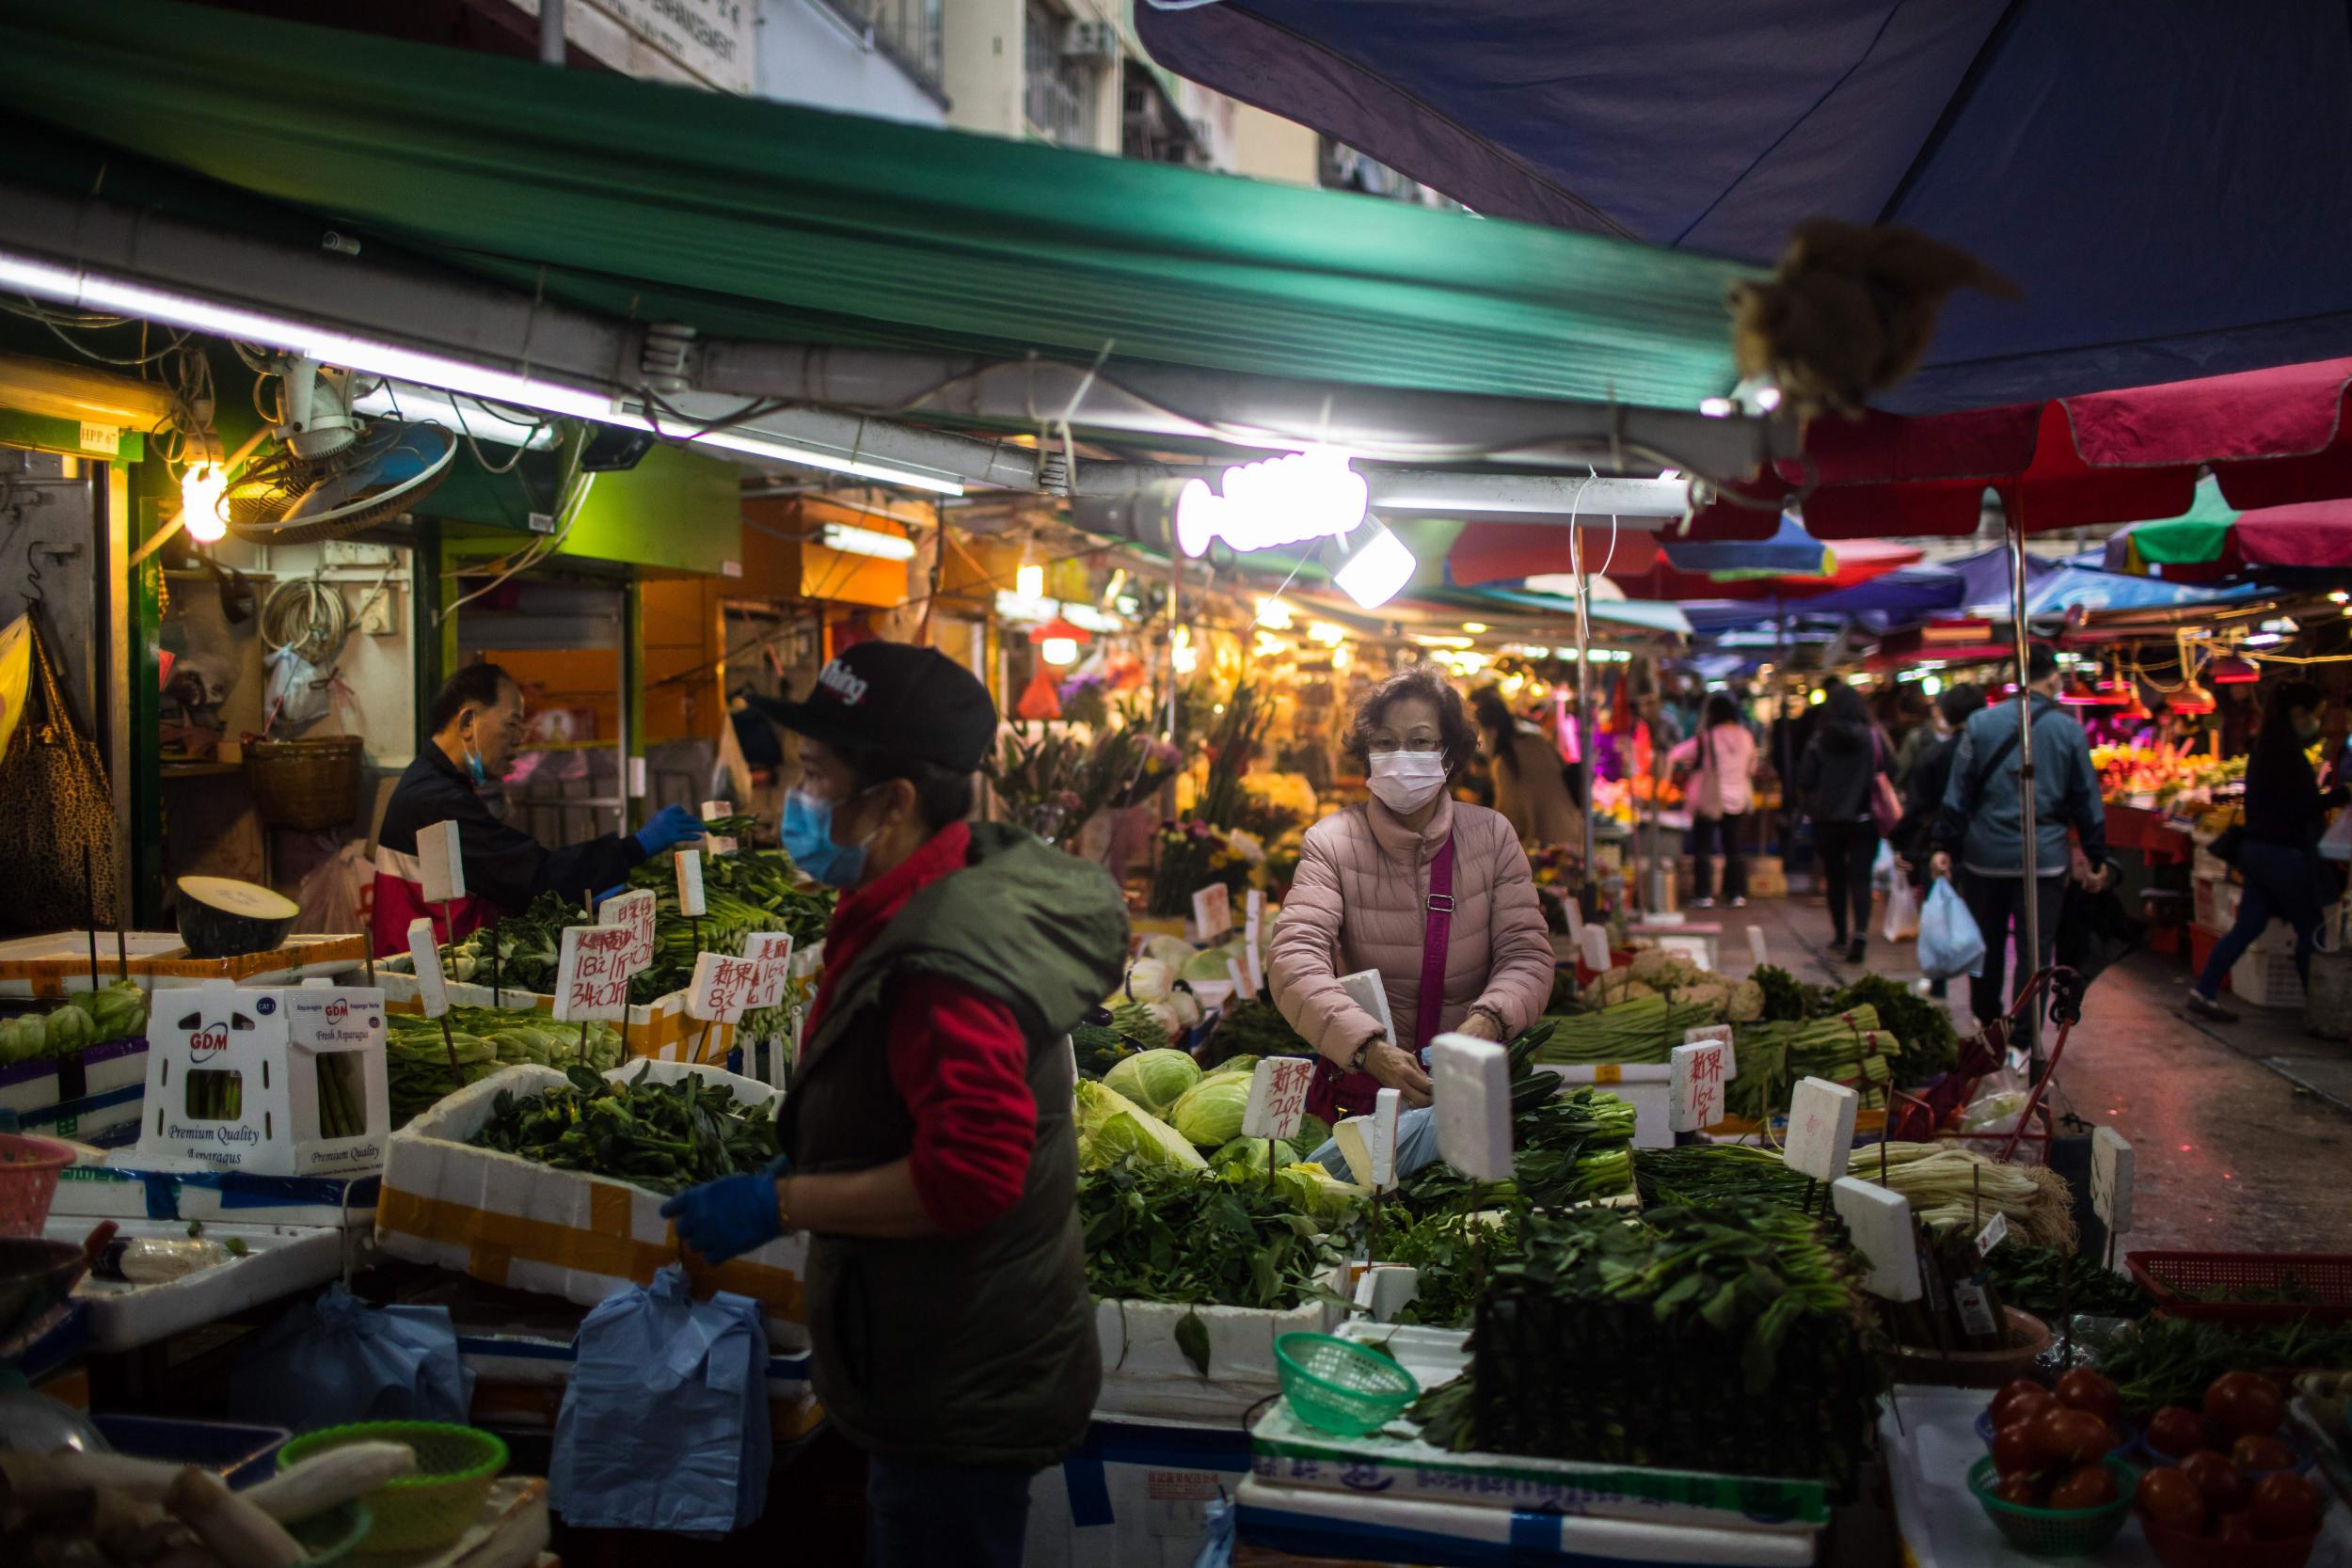 There are multiple campaigns in action to get wet markets closed down around China